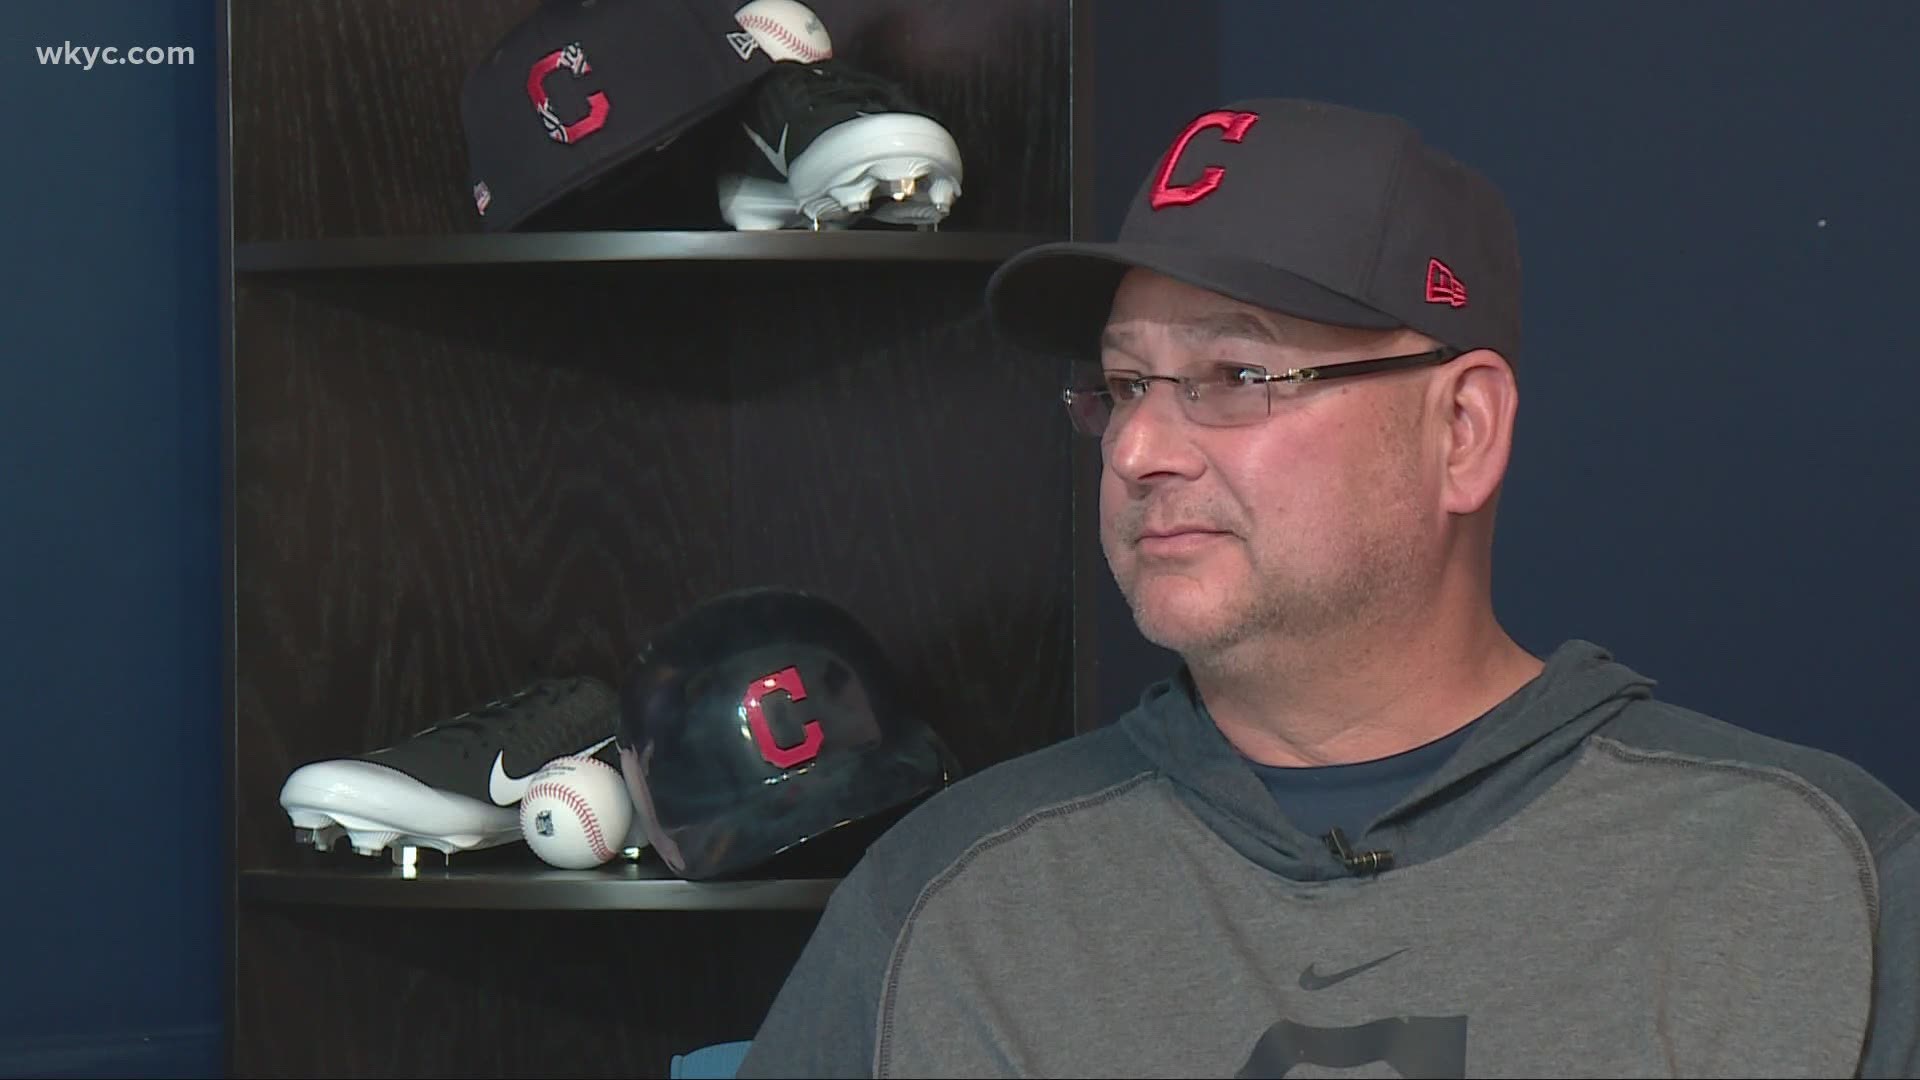 Everyone's excited by the return of baseball in a matter of days! Davye Chudowsky spoke to the Indians manager back in the spring, before COVID-19 shut things down.